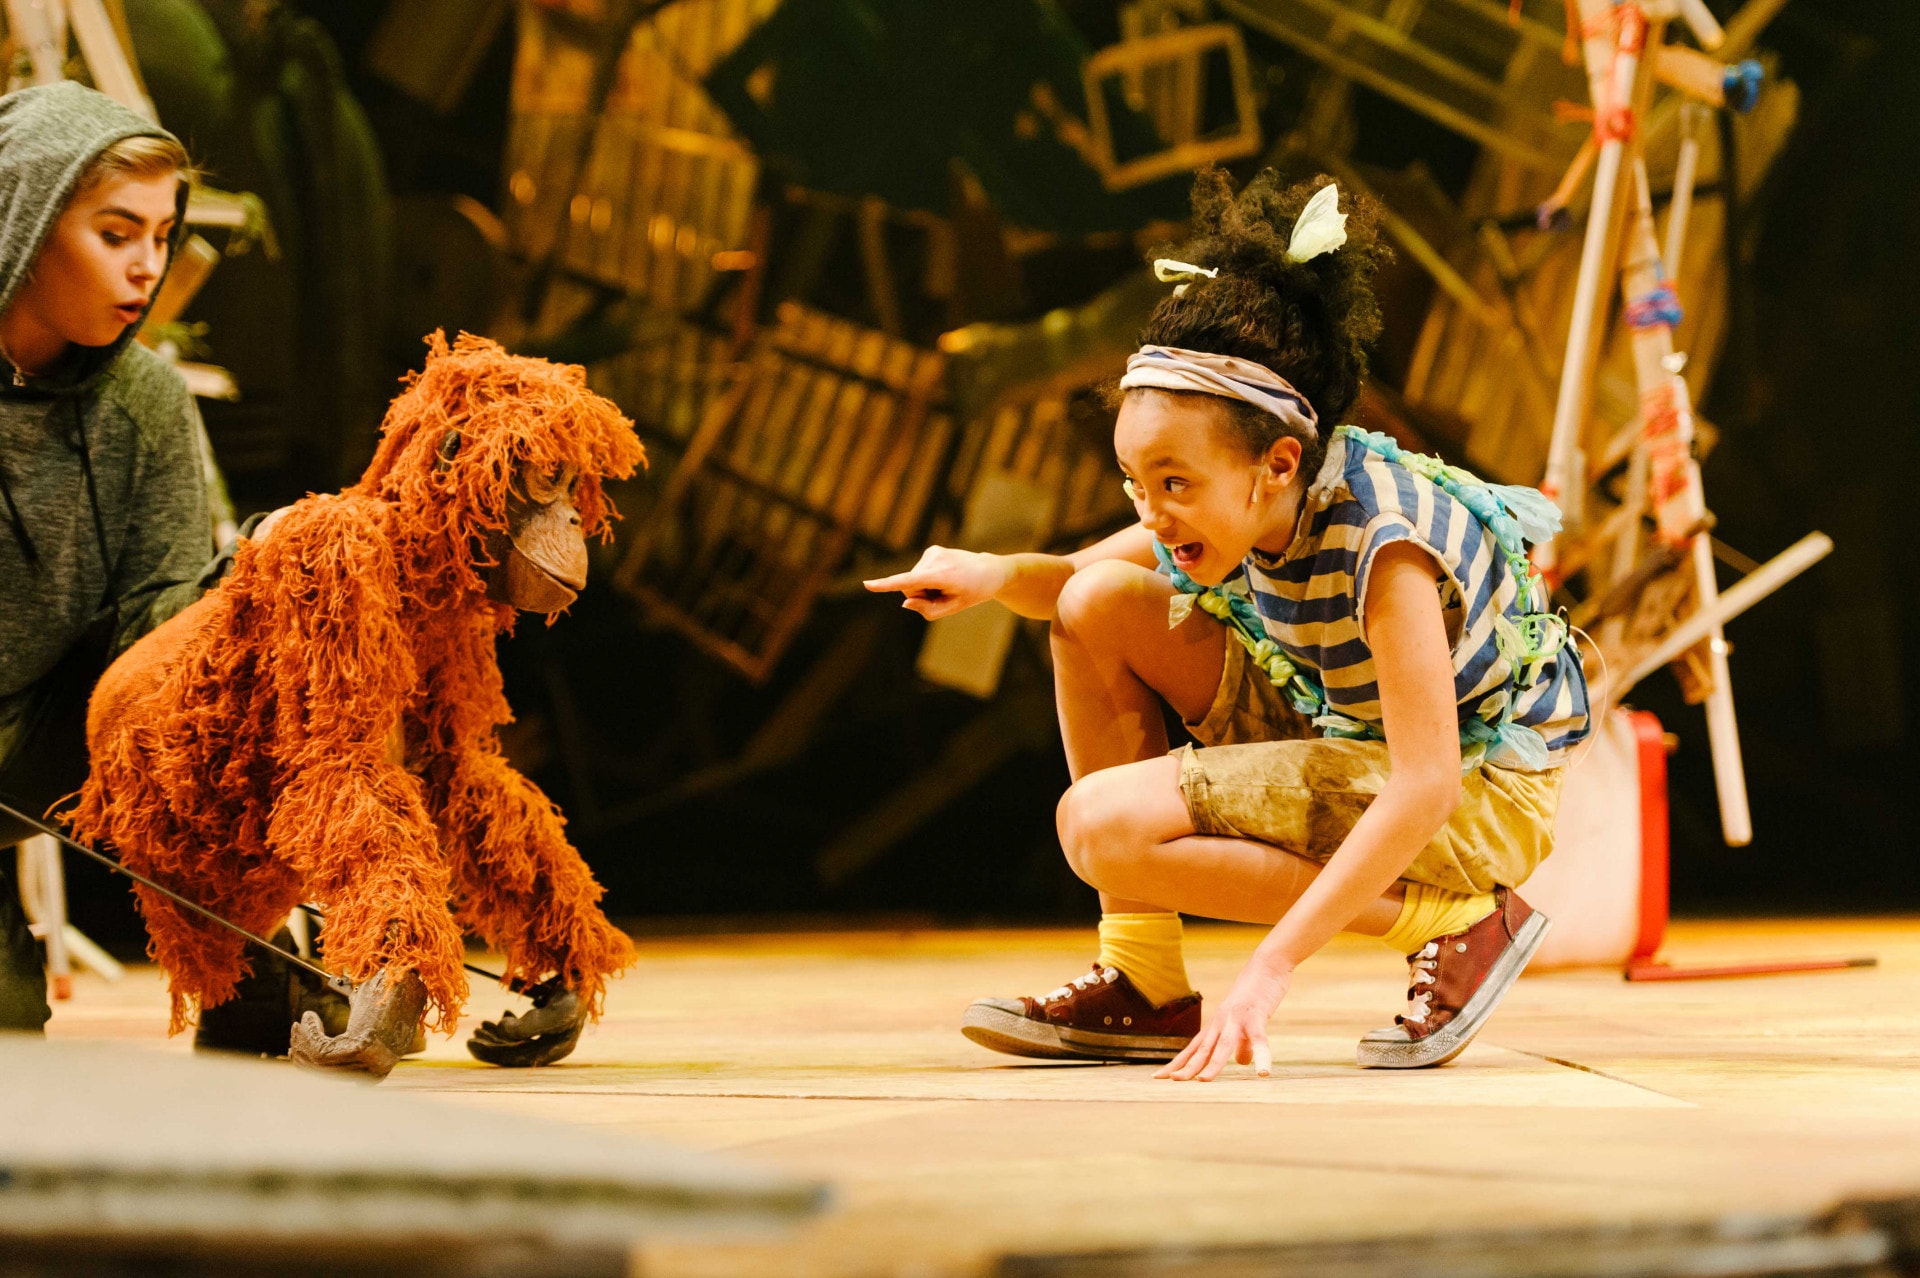 India Brown as Lilly with Frank, baby Orangutan in Running Wild